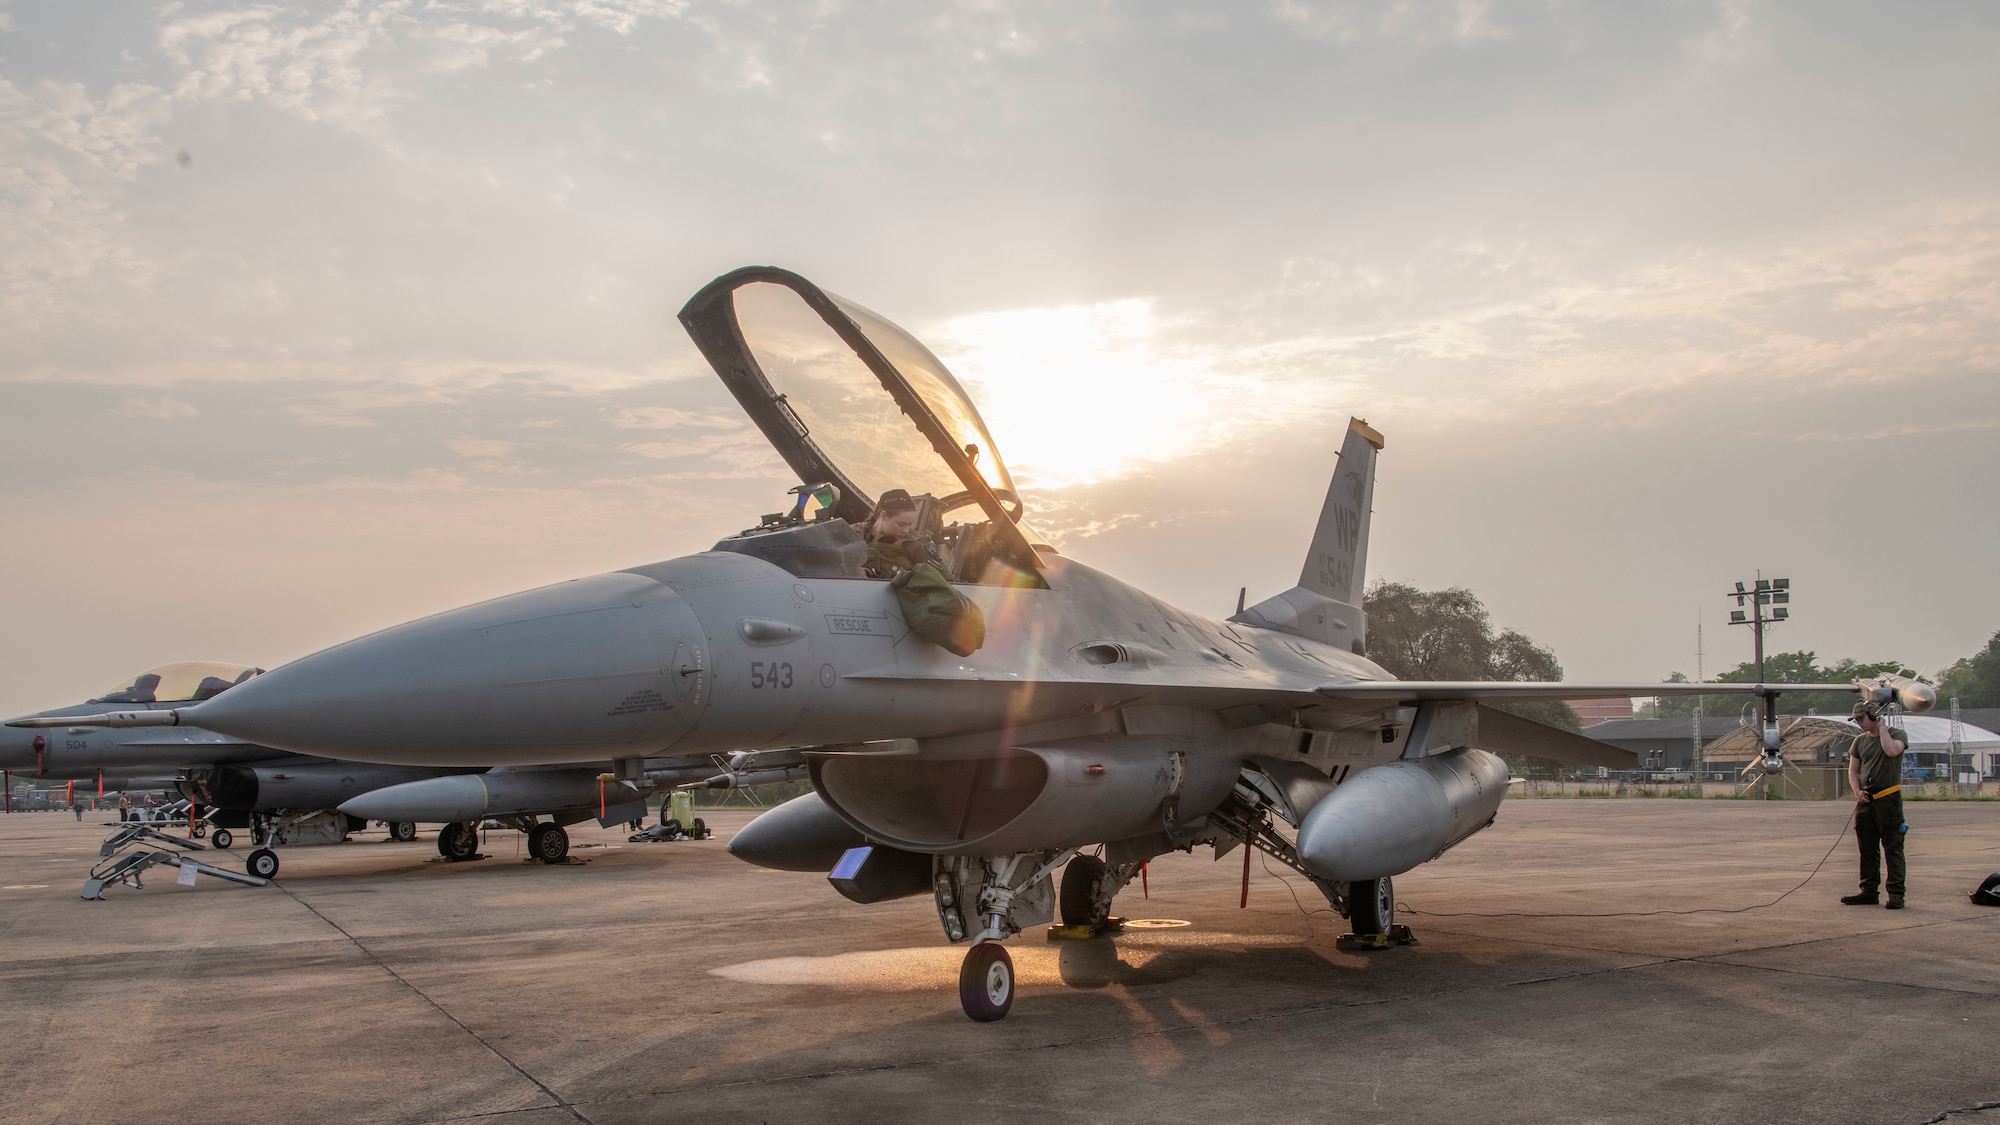 First Lt. Samantha “Force” Colombo, 35th Fighter Squadron pilot, returns from flying an F-16 Fighting Falcon during Cope Tiger 2022 at Korat Royal Thai Air Base, Thailand, March 18, 2022. Colombo is currently the only female fighter pilot stationed at Kunsan Air Base, Republic of Korea. (U.S. Air Force photo by Staff Sgt. Jesenia Landaverde)